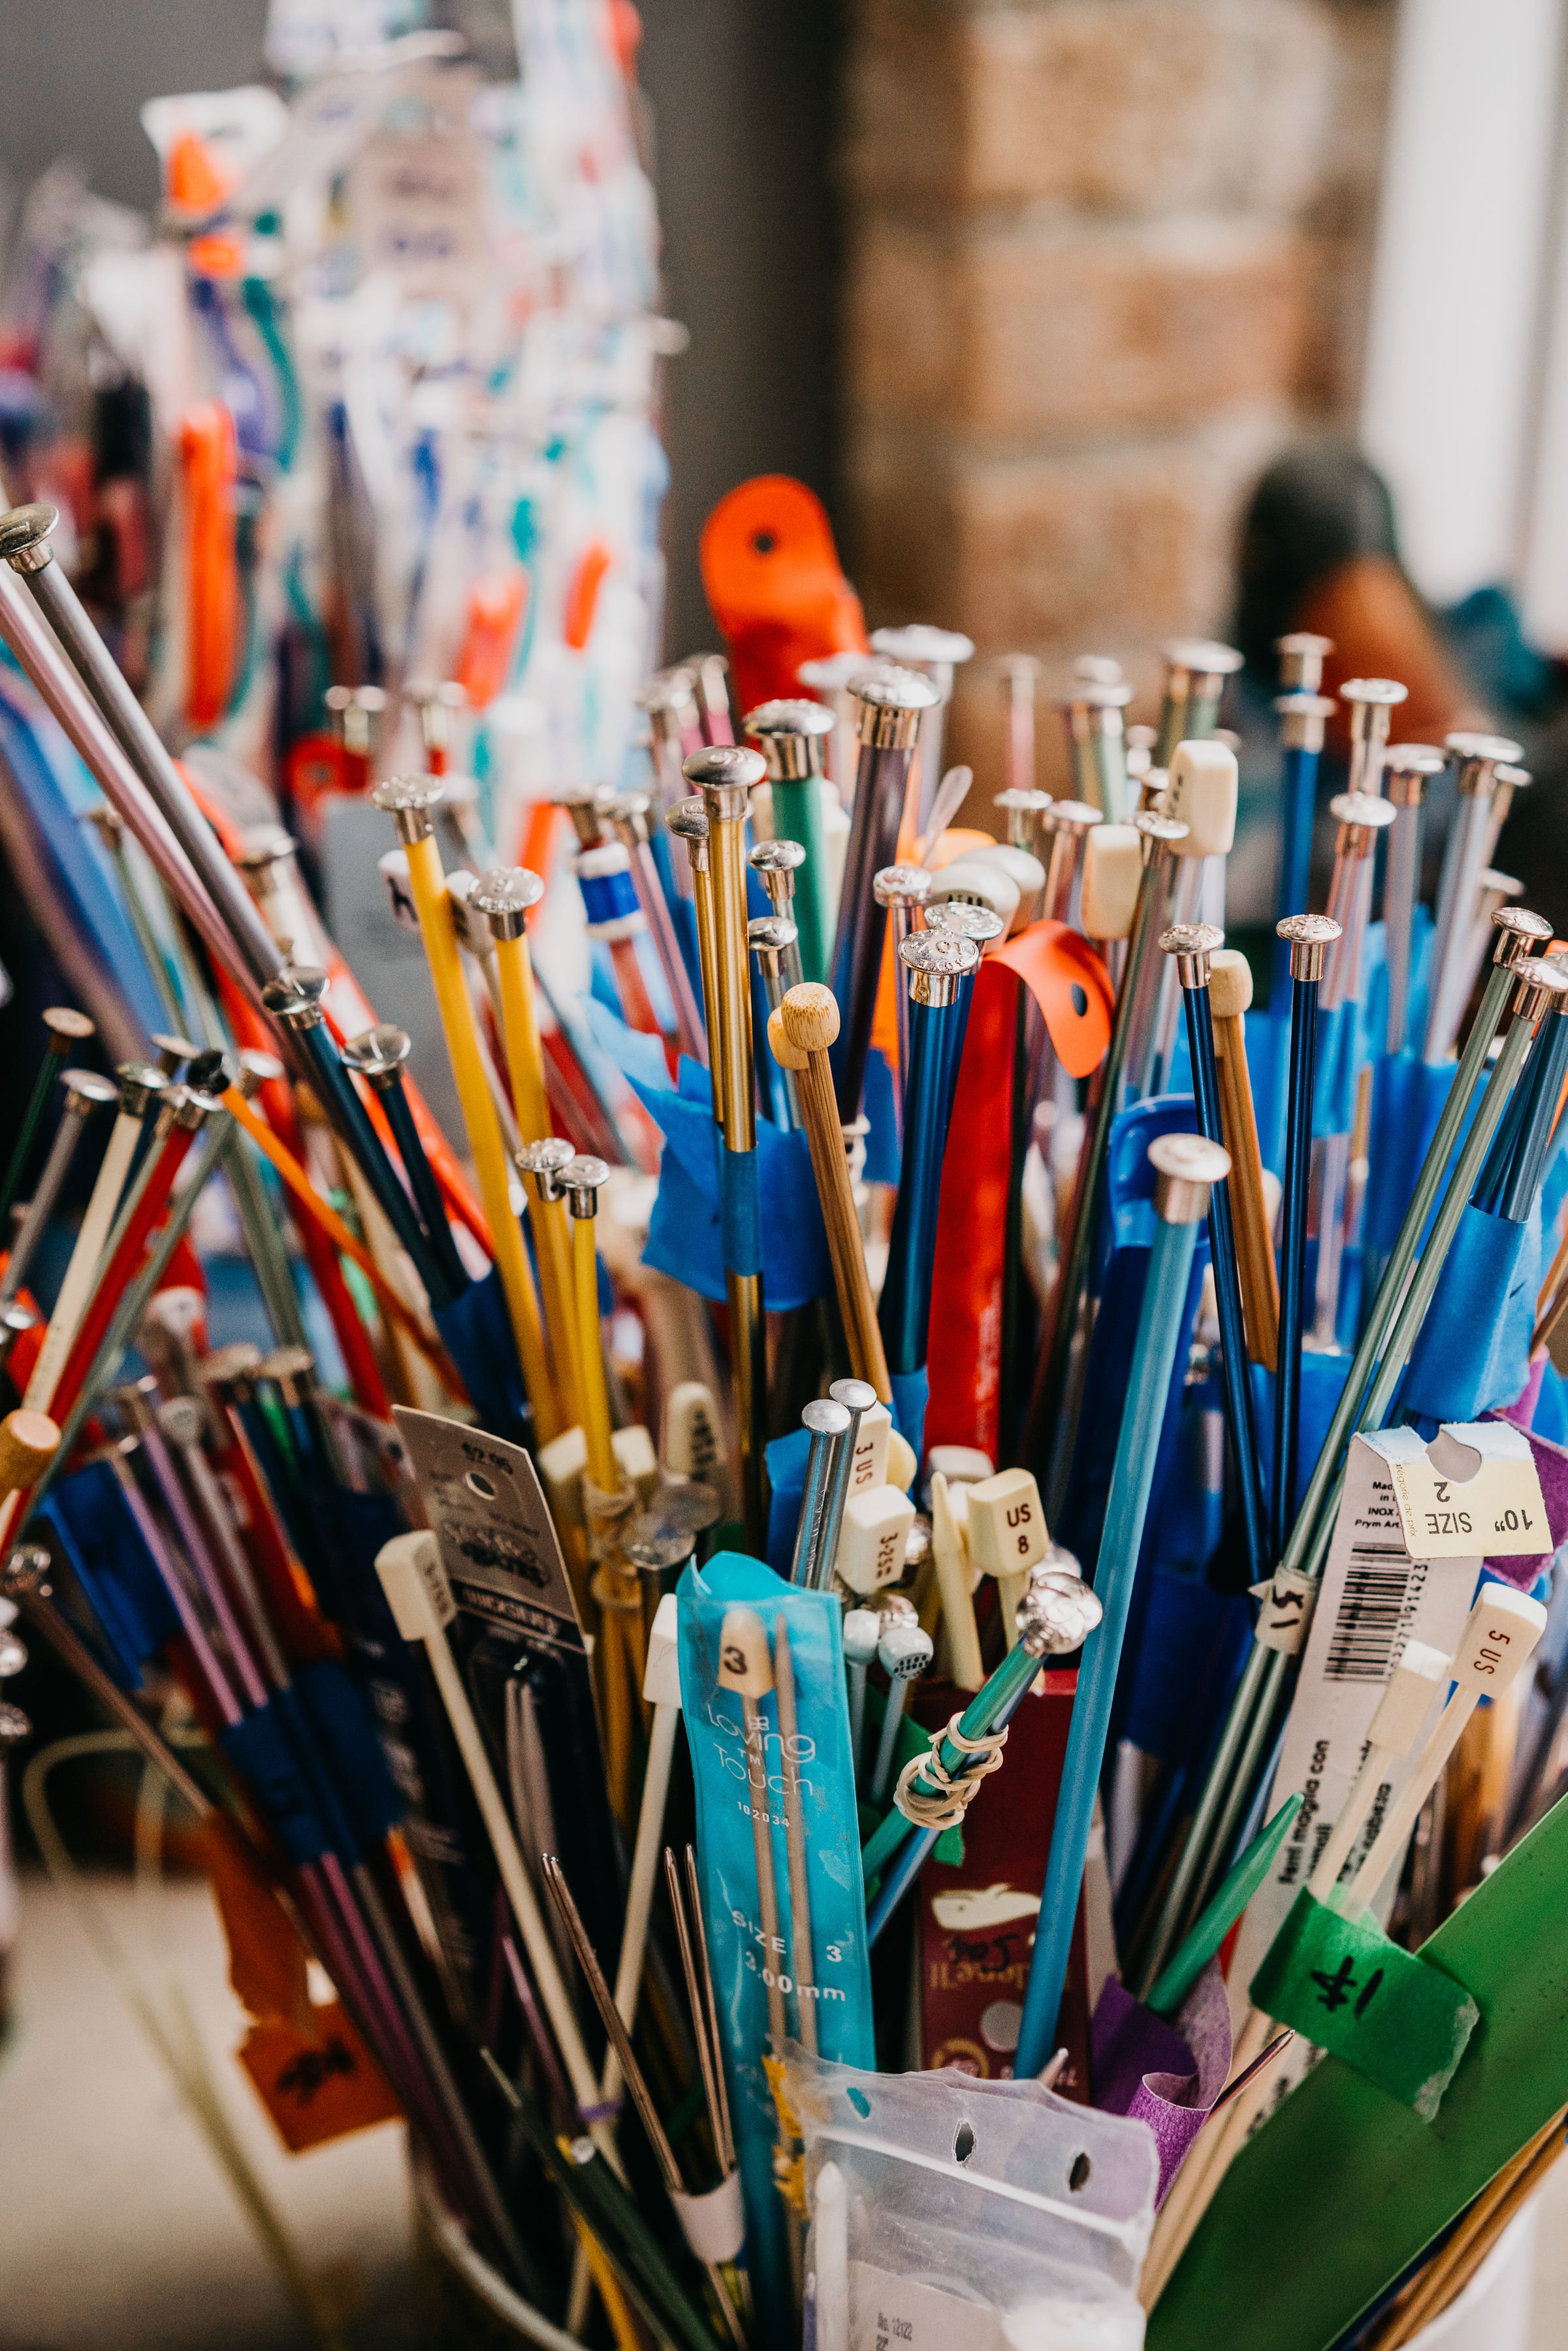 How This Art Supply Thrift Store Supports Creative Reuse